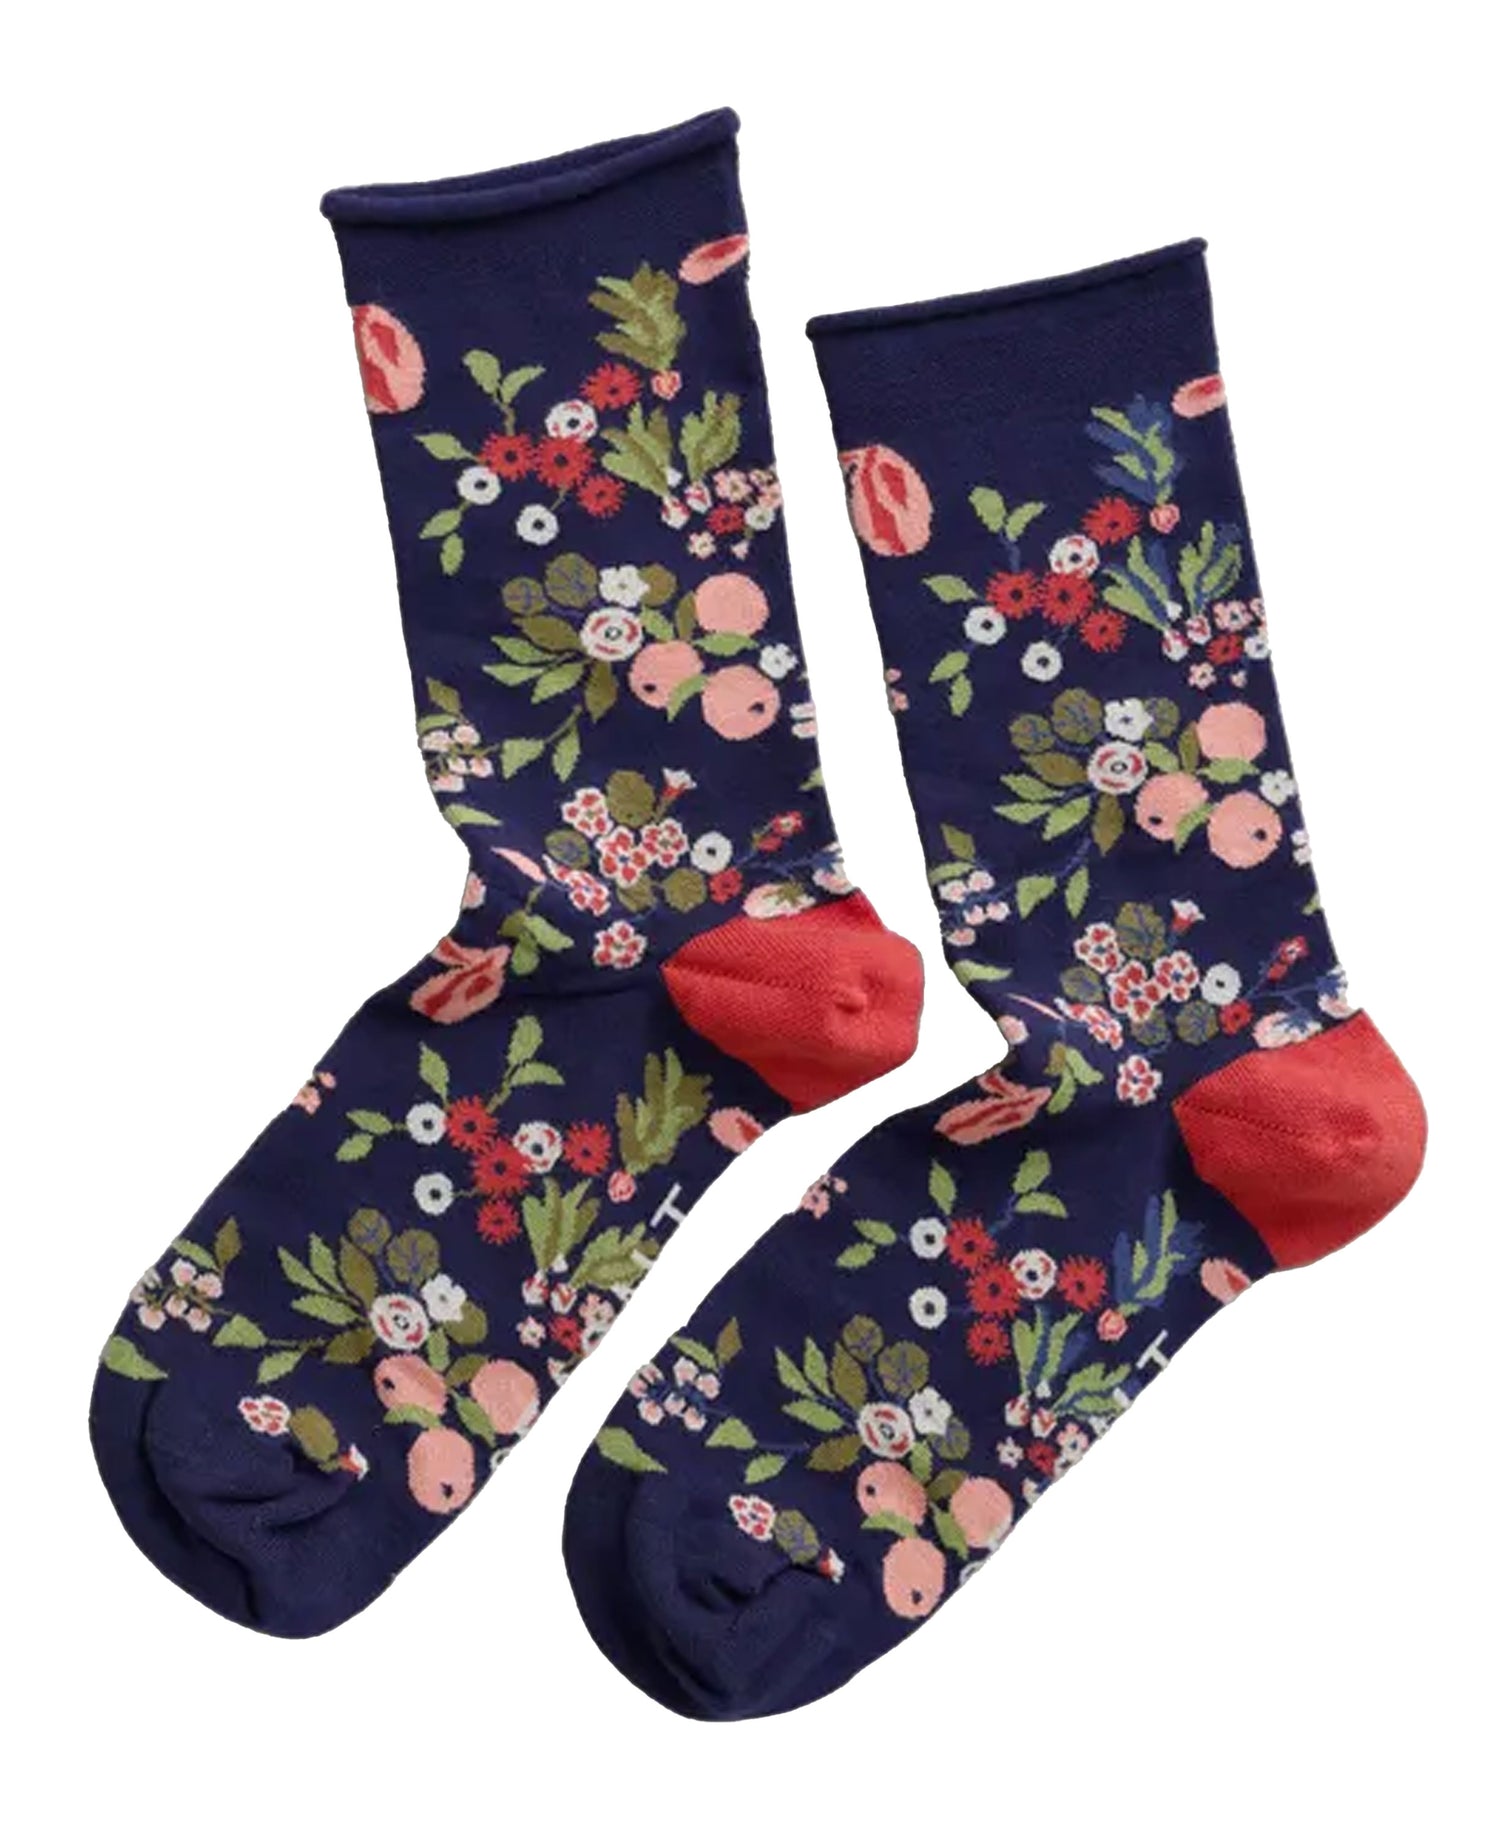 Bamboo Arty Socks - Fruits And Flowers Maritime